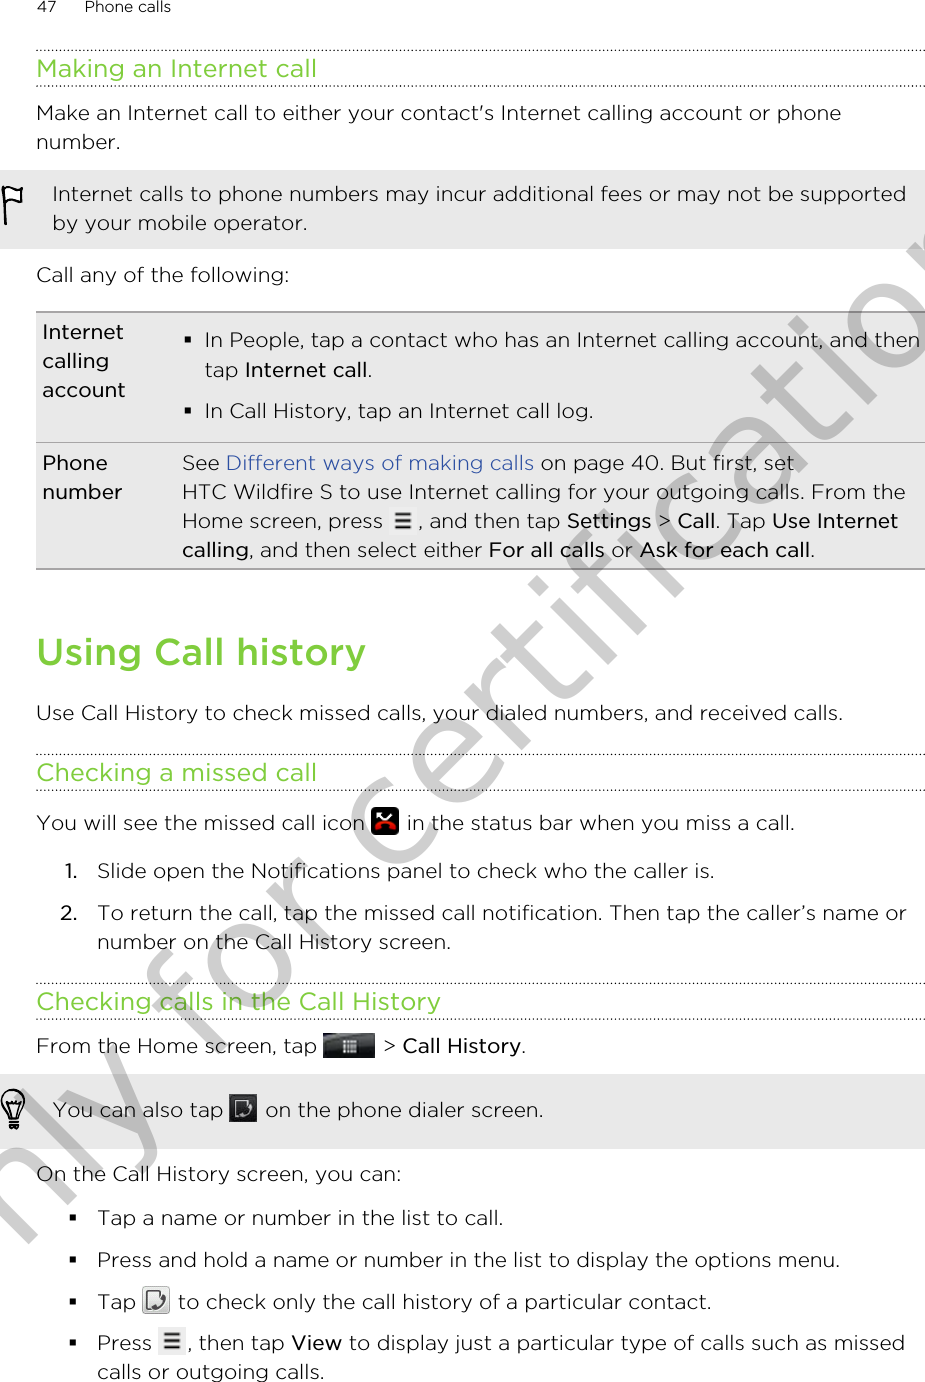 Making an Internet callMake an Internet call to either your contact&apos;s Internet calling account or phonenumber.Internet calls to phone numbers may incur additional fees or may not be supportedby your mobile operator.Call any of the following:Internetcallingaccount§In People, tap a contact who has an Internet calling account, and thentap Internet call.§In Call History, tap an Internet call log.PhonenumberSee Different ways of making calls on page 40. But first, setHTC Wildfire S to use Internet calling for your outgoing calls. From theHome screen, press  , and then tap Settings &gt; Call. Tap Use Internetcalling, and then select either For all calls or Ask for each call.Using Call historyUse Call History to check missed calls, your dialed numbers, and received calls.Checking a missed callYou will see the missed call icon   in the status bar when you miss a call.1. Slide open the Notifications panel to check who the caller is.2. To return the call, tap the missed call notification. Then tap the caller’s name ornumber on the Call History screen.Checking calls in the Call HistoryFrom the Home screen, tap   &gt; Call History. You can also tap   on the phone dialer screen.On the Call History screen, you can:§Tap a name or number in the list to call.§Press and hold a name or number in the list to display the options menu.§Tap   to check only the call history of a particular contact.§Press  , then tap View to display just a particular type of calls such as missedcalls or outgoing calls.47 Phone callsOnly for certification